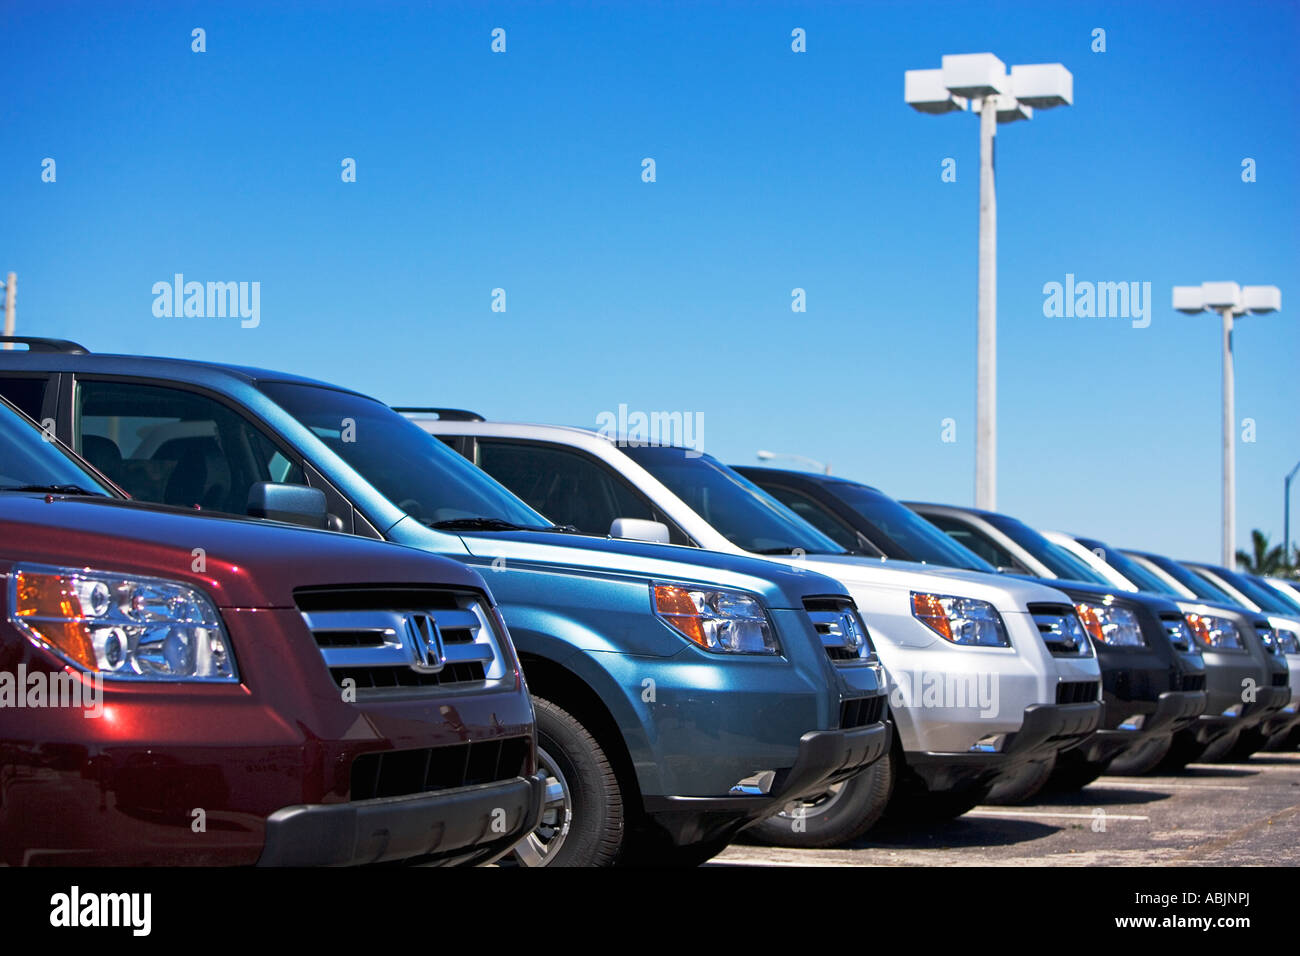 Row of new cars on lot Stock Photo